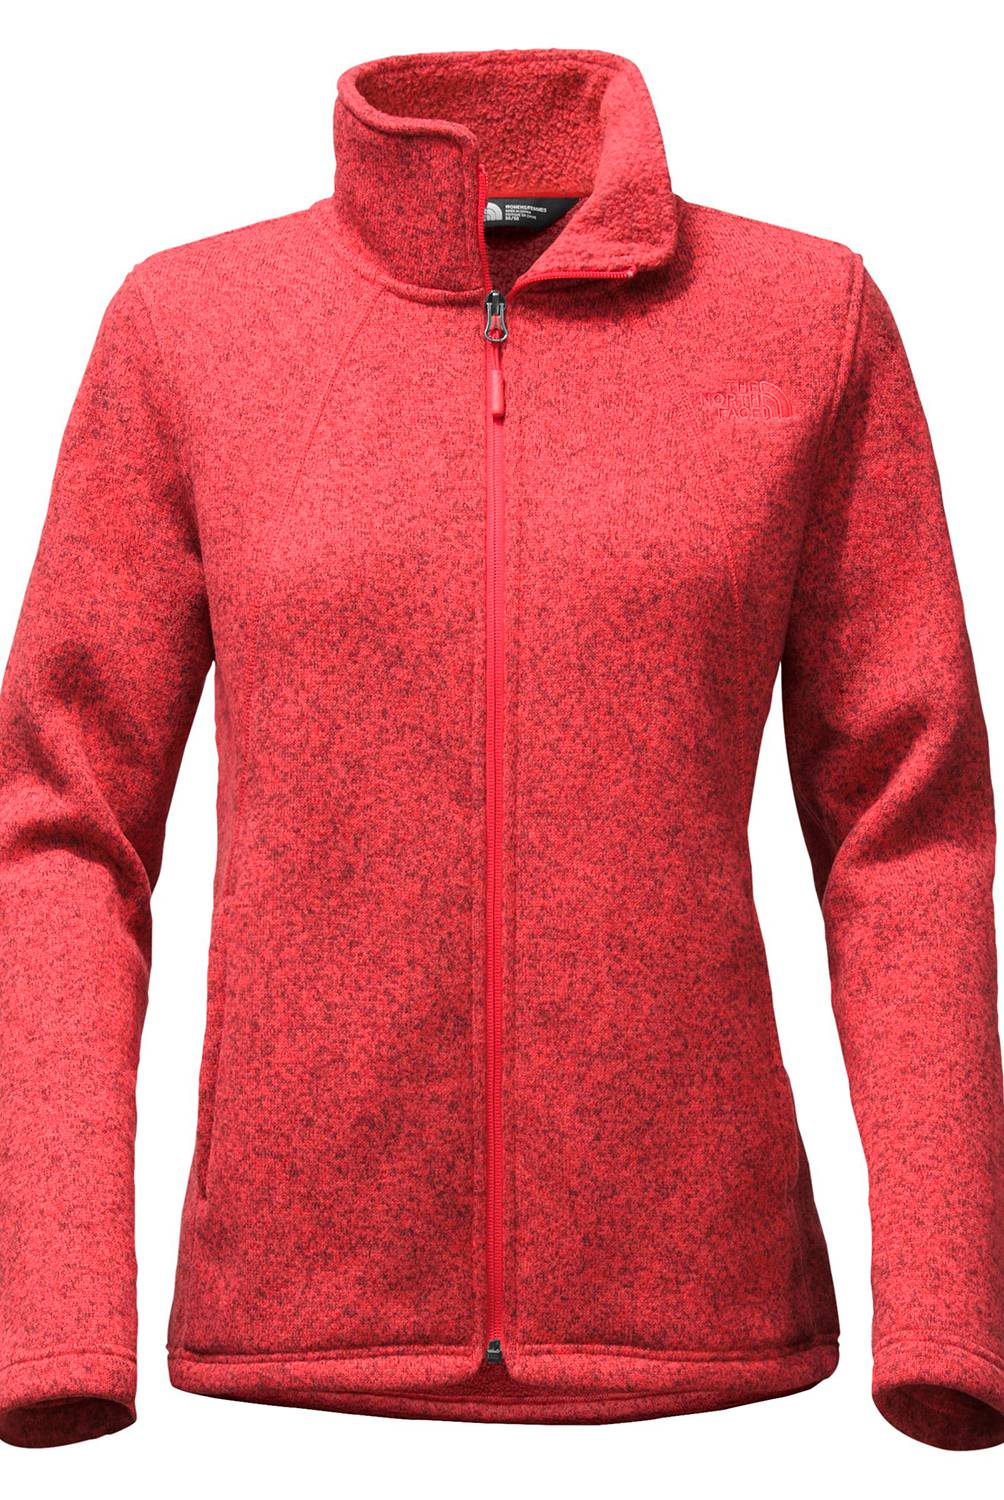 THE NORTH FACE - The North Face Polerón Full Zipper Mujer